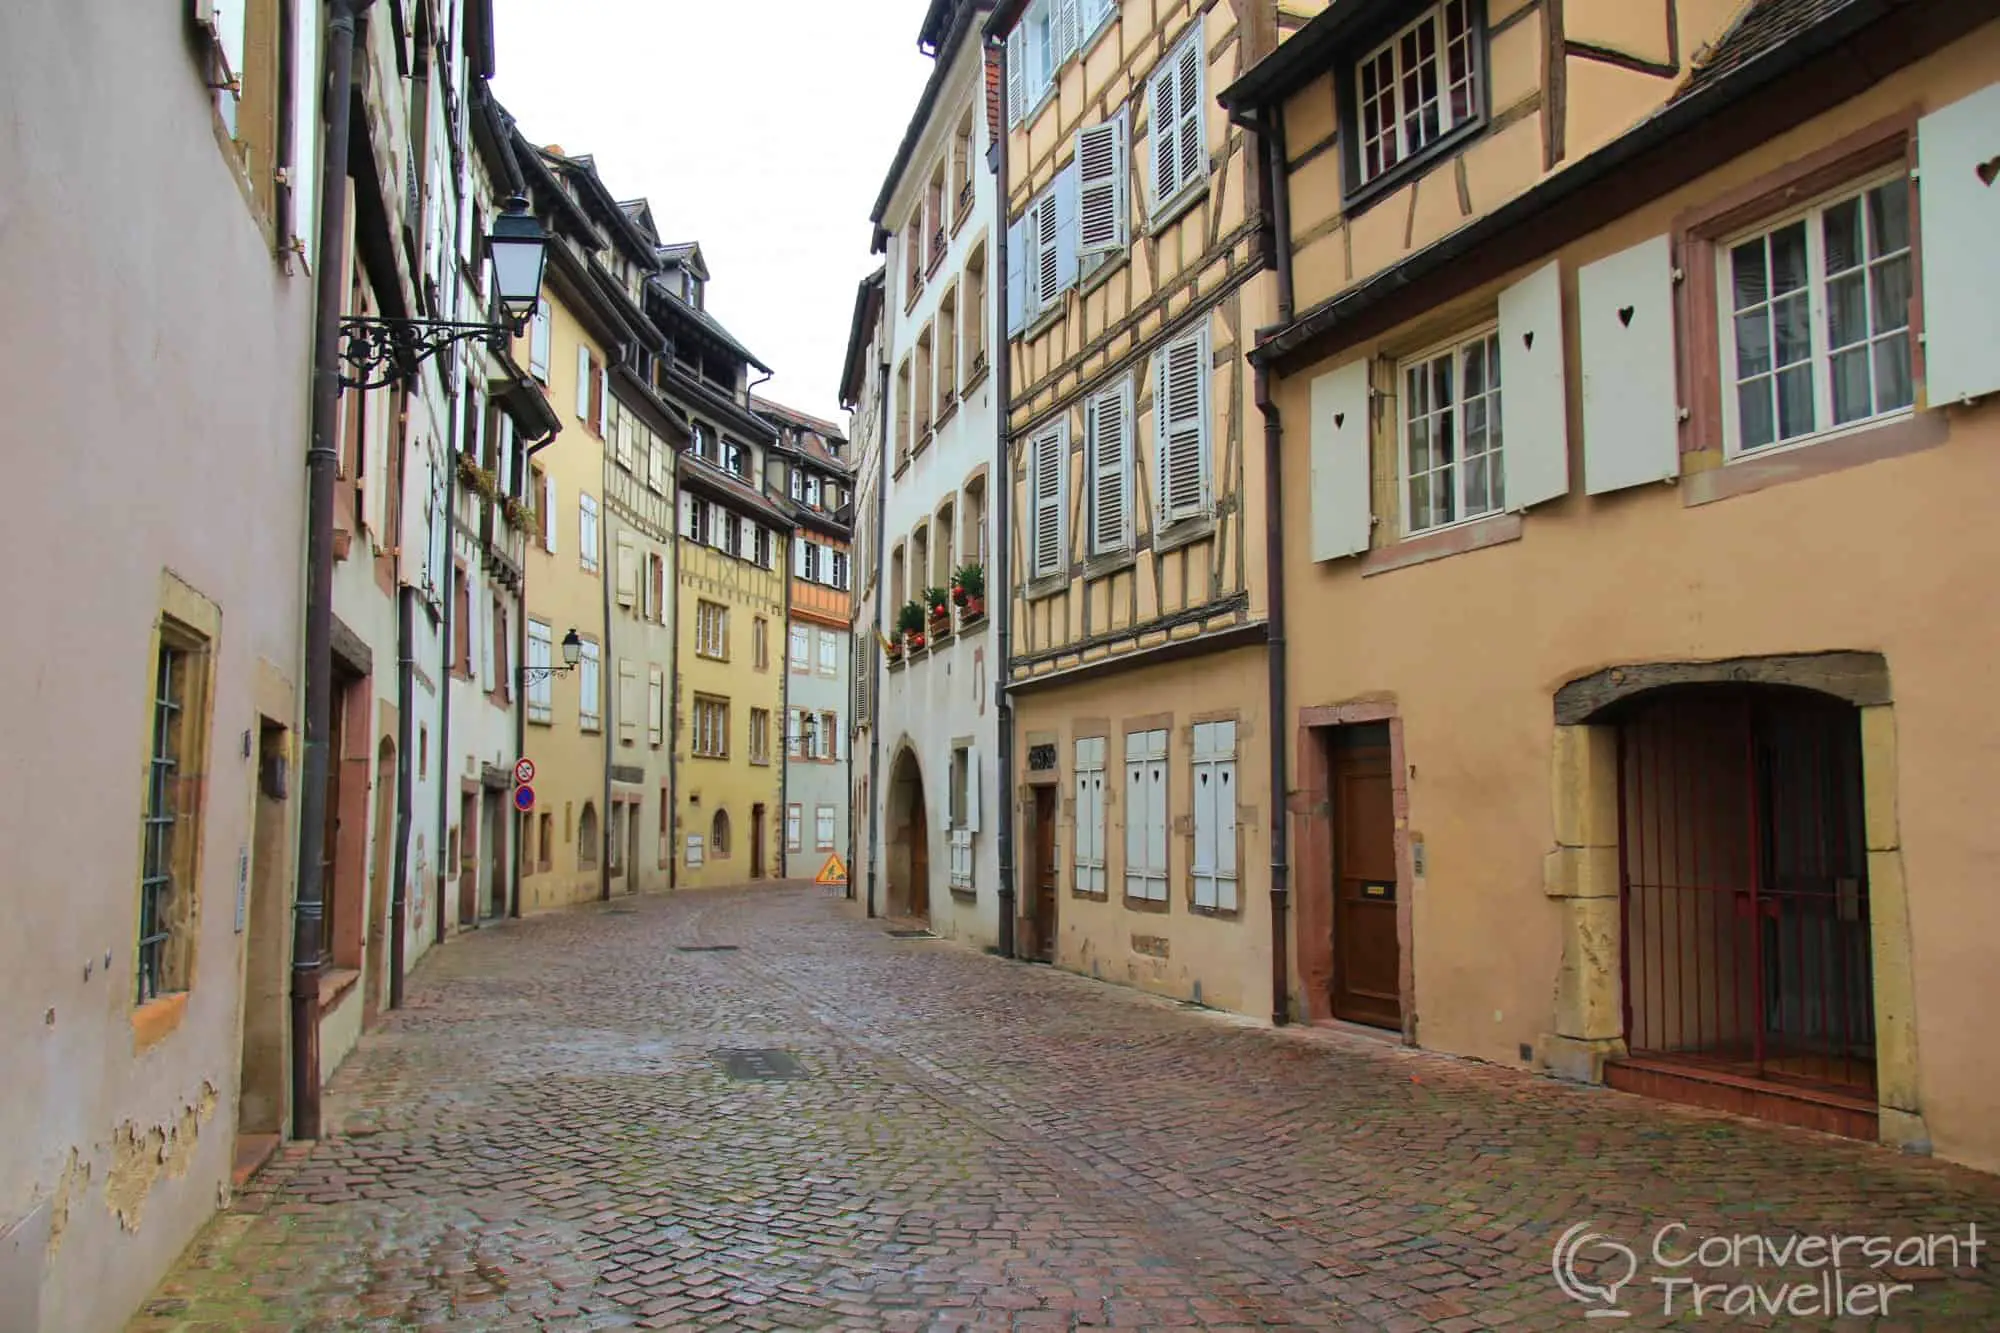 The iconic high timber framed buildings of the Tanners District, Colmar